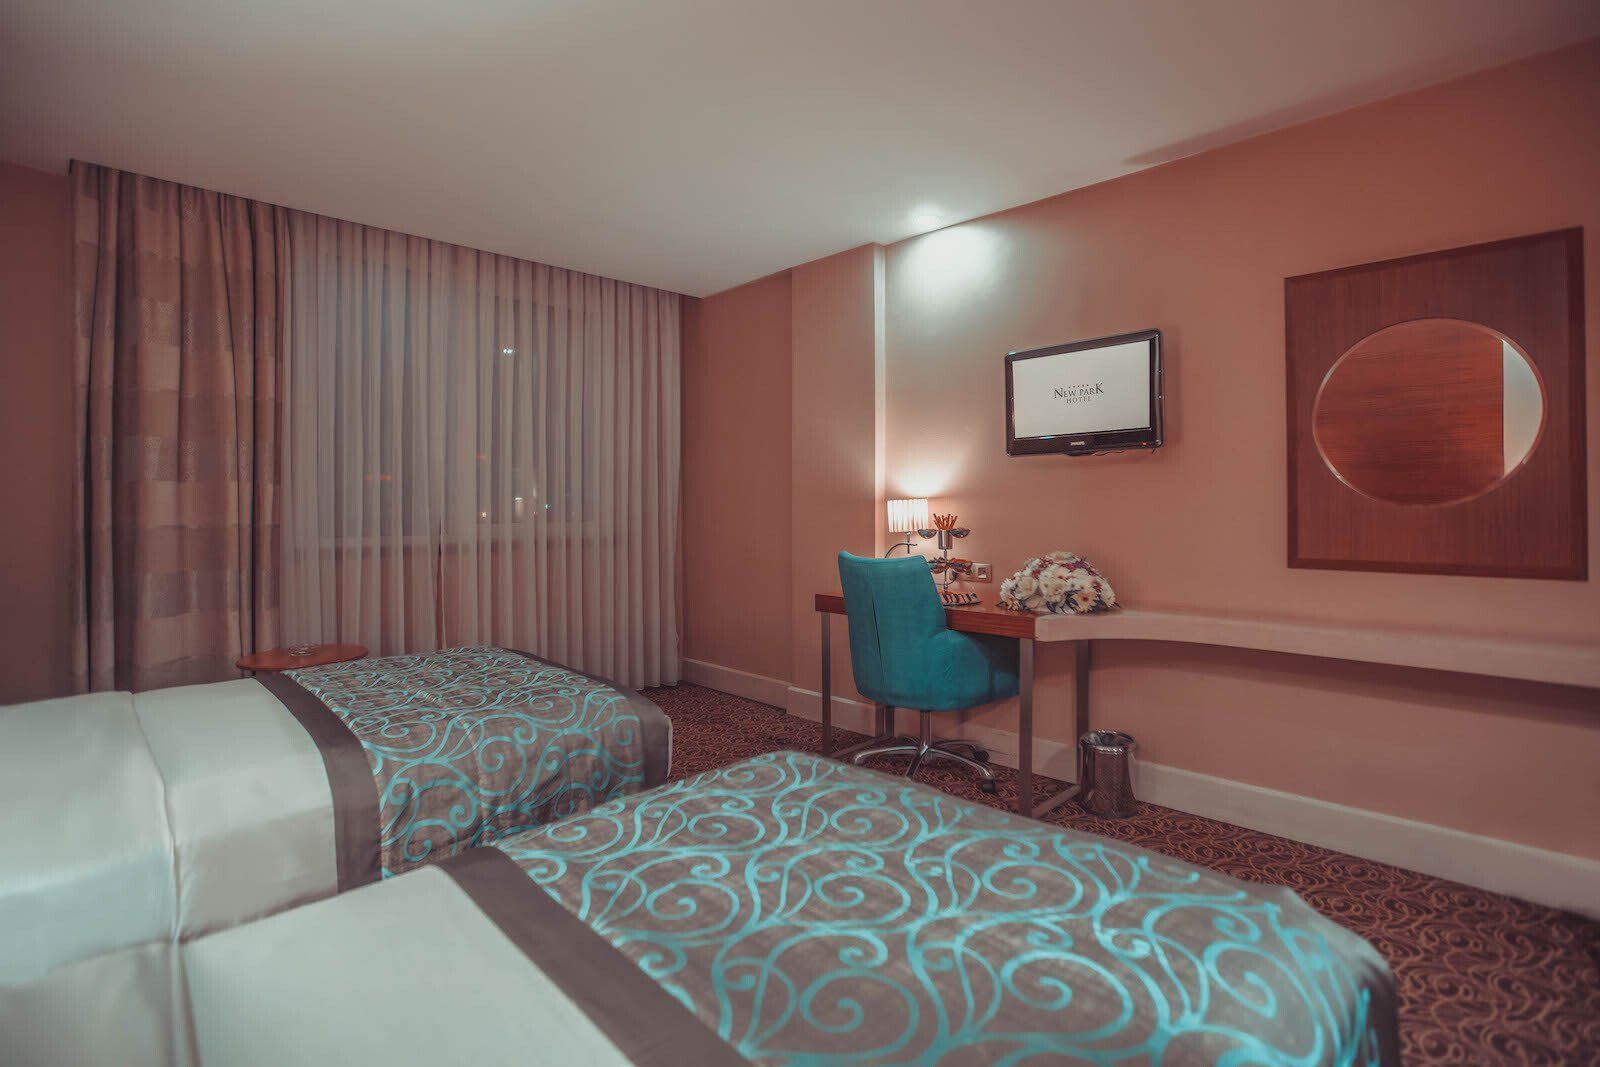 New Park Hotel Ankara Deluxe Connected Room